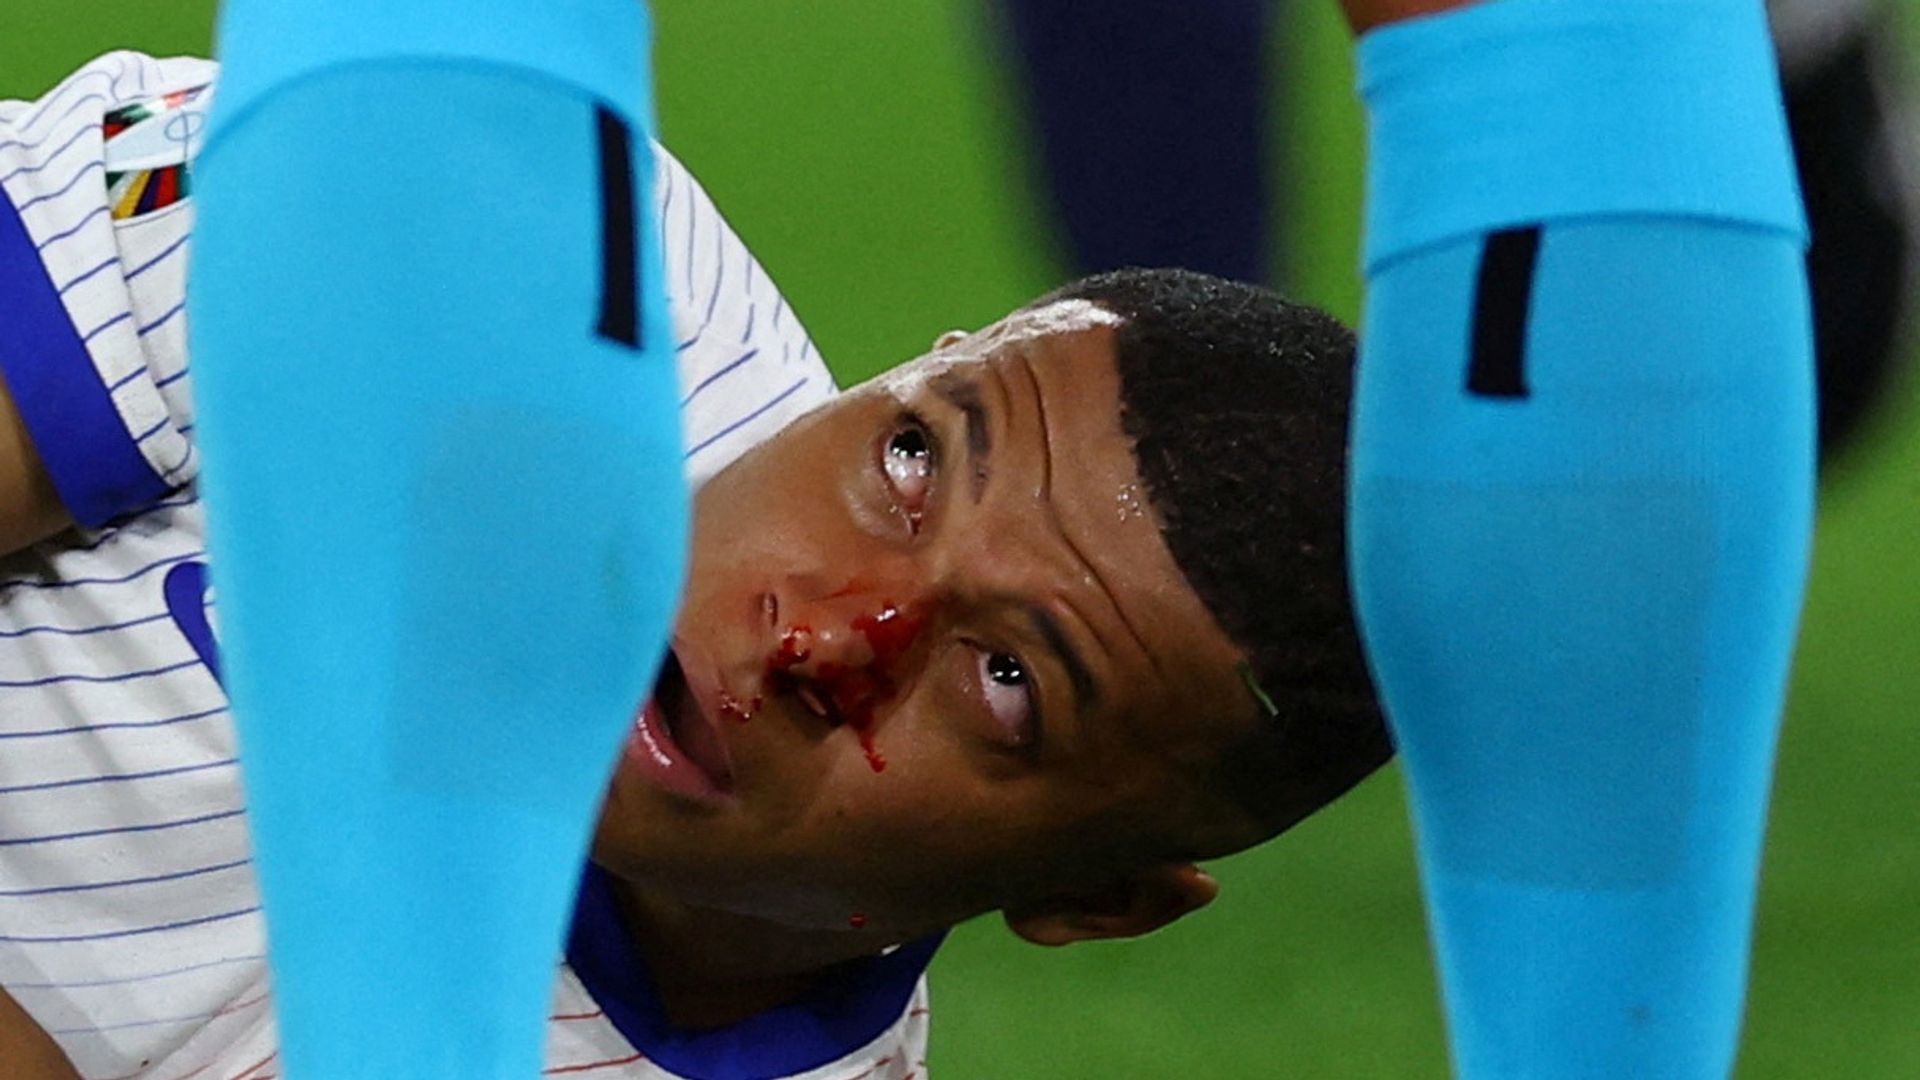 'Very bad news' for France at Euros as star player suffers broken nose